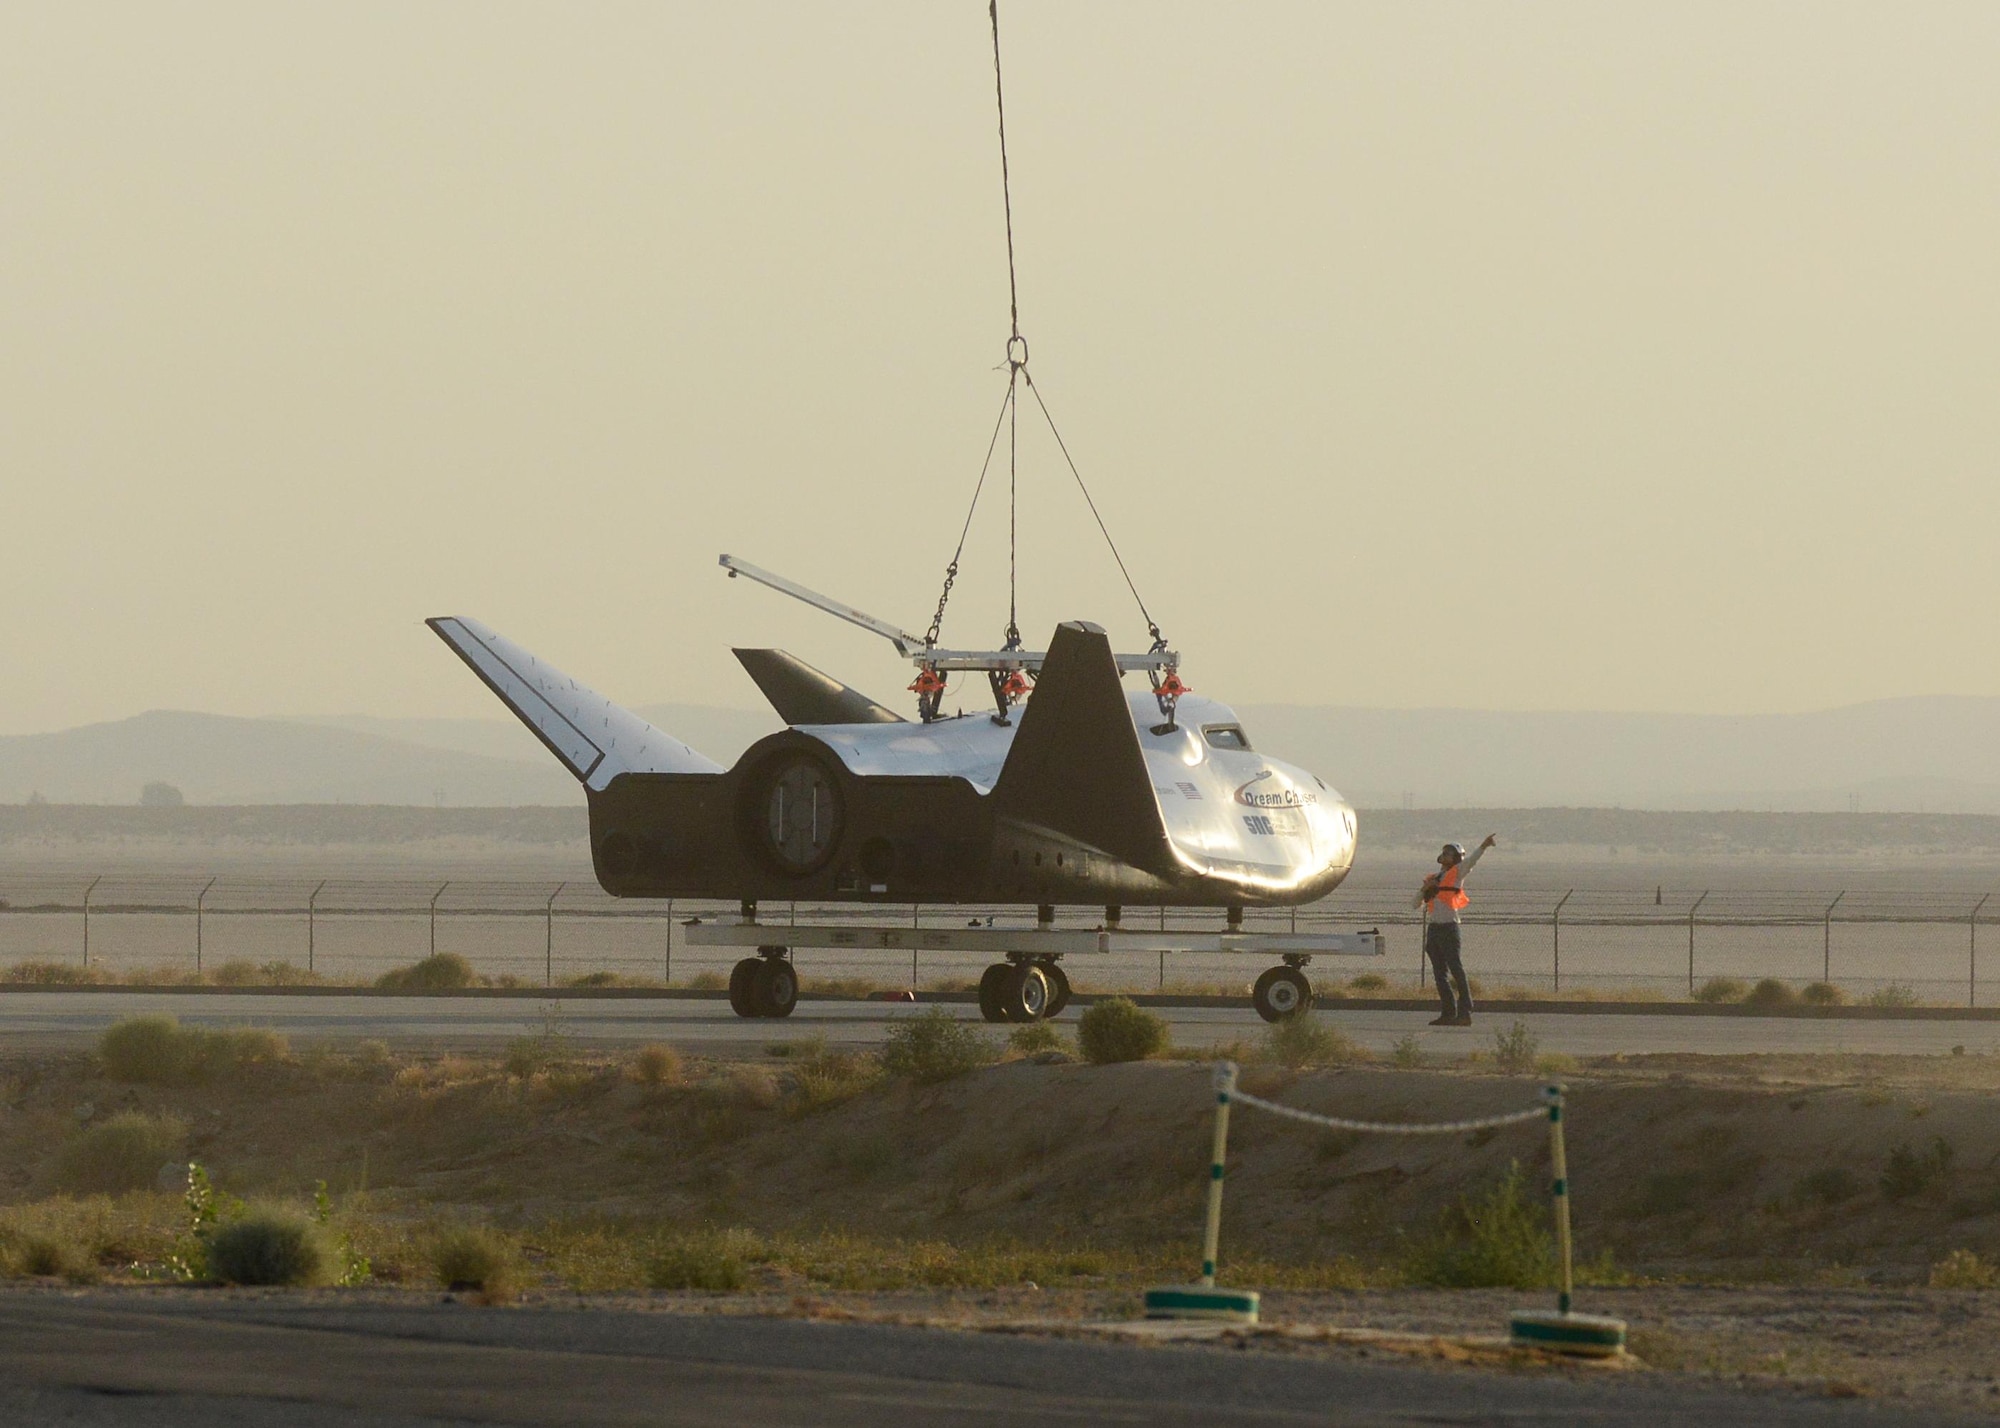 Dream Chaser captive carry test